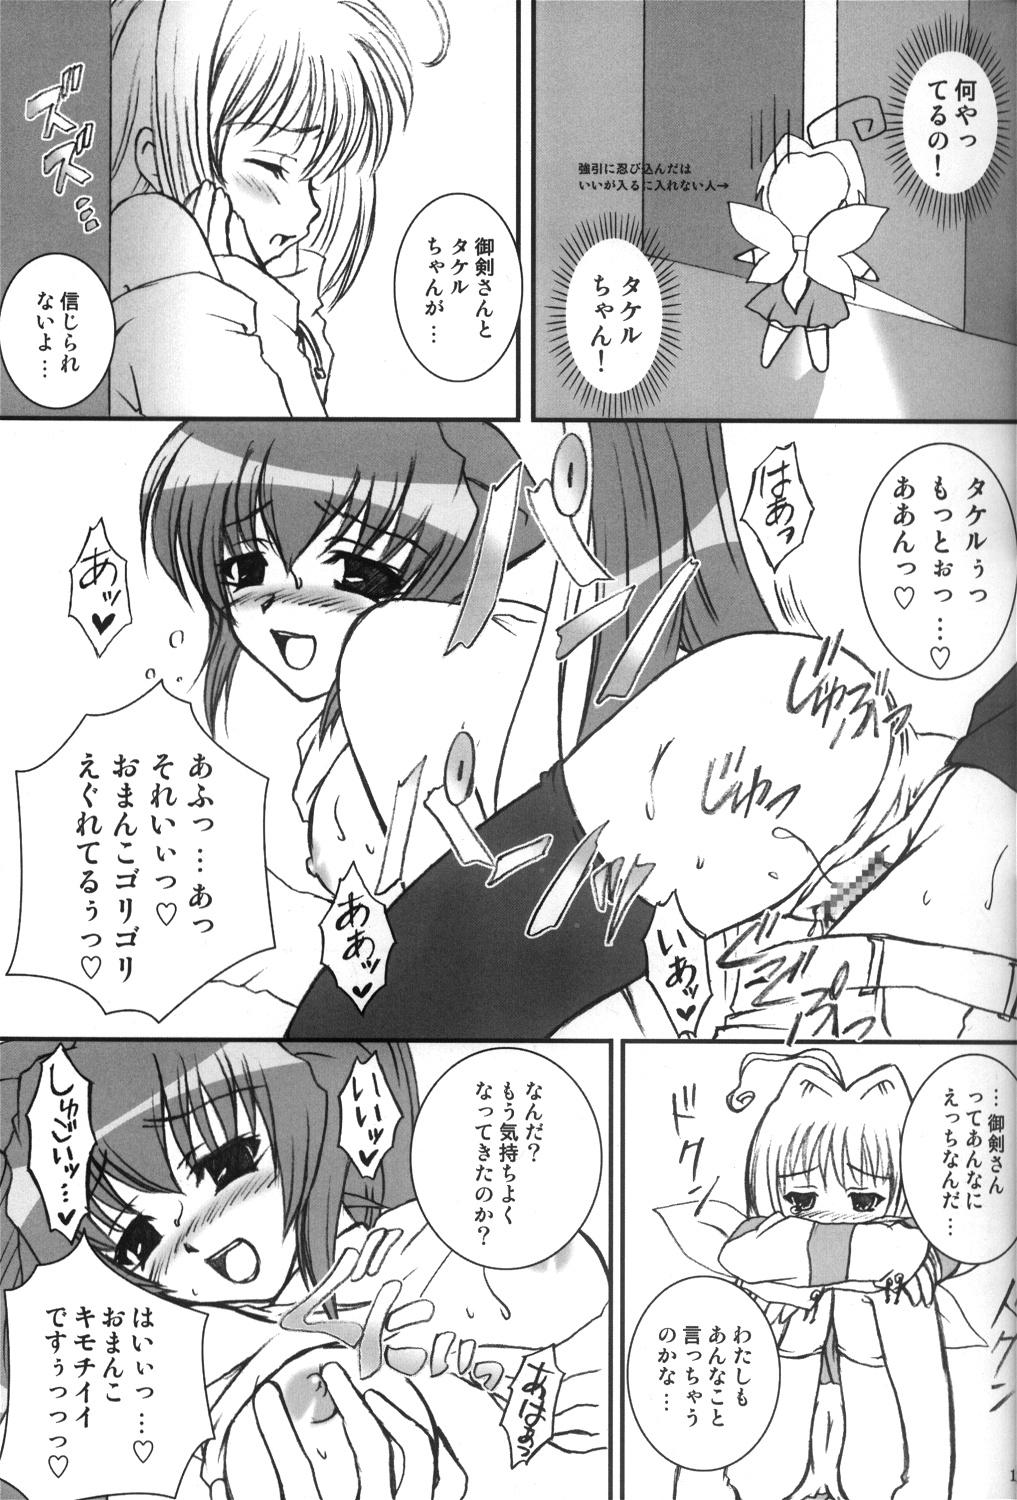 Man I have fallen in love with you... - Muv luv Spooning - Page 12